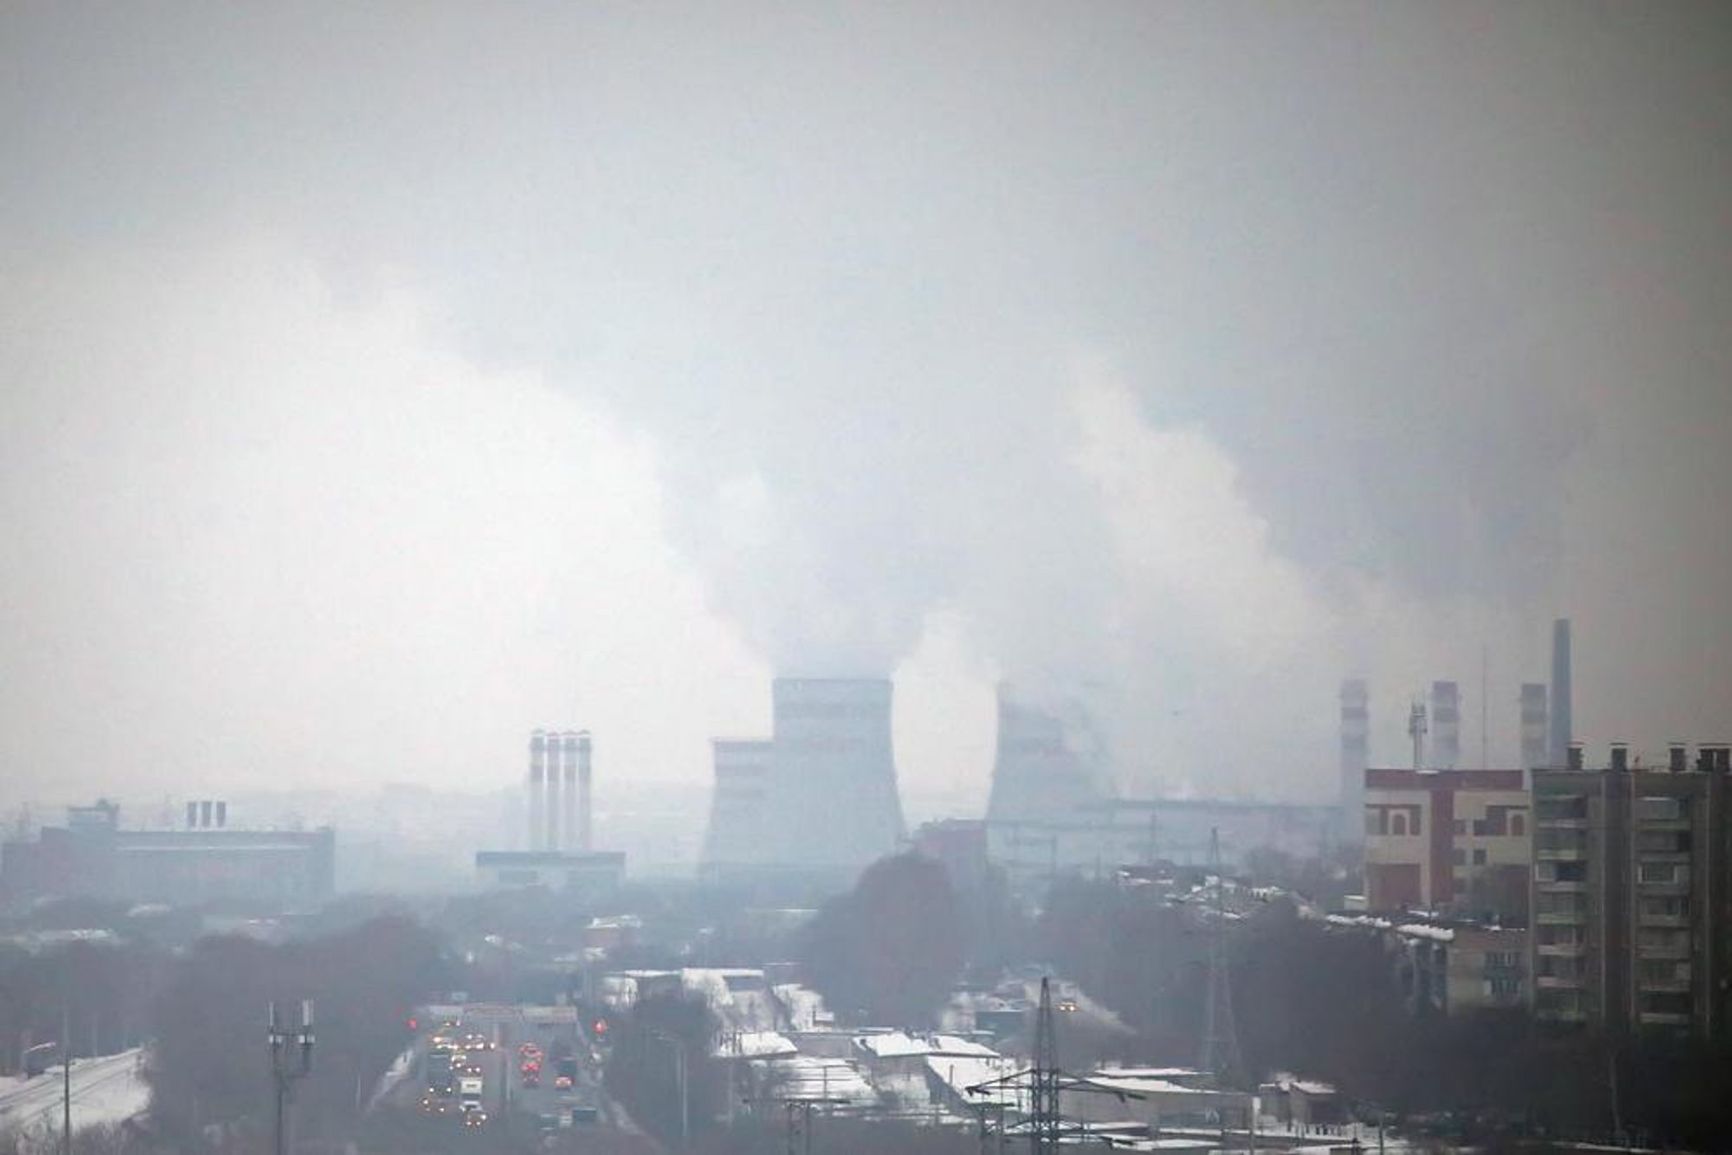 Chelyabinsk is among Russia's most polluted cities